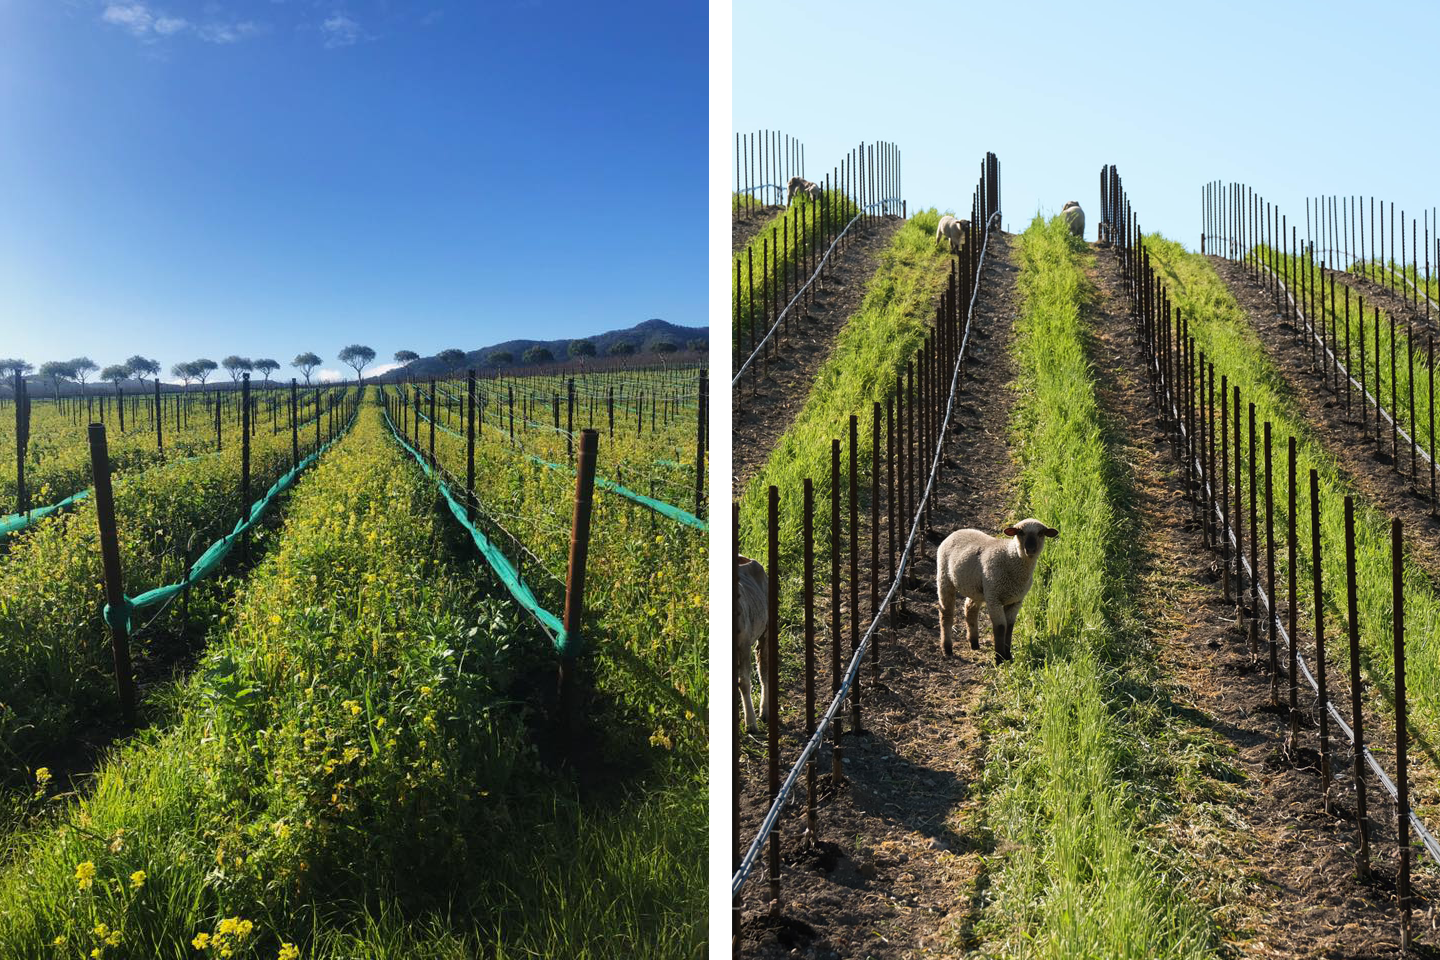 Pictured left: cover crop between rows at Jespersen Ranch. Right: Sheep graze on cover crops at Heart Hill Vineyard.